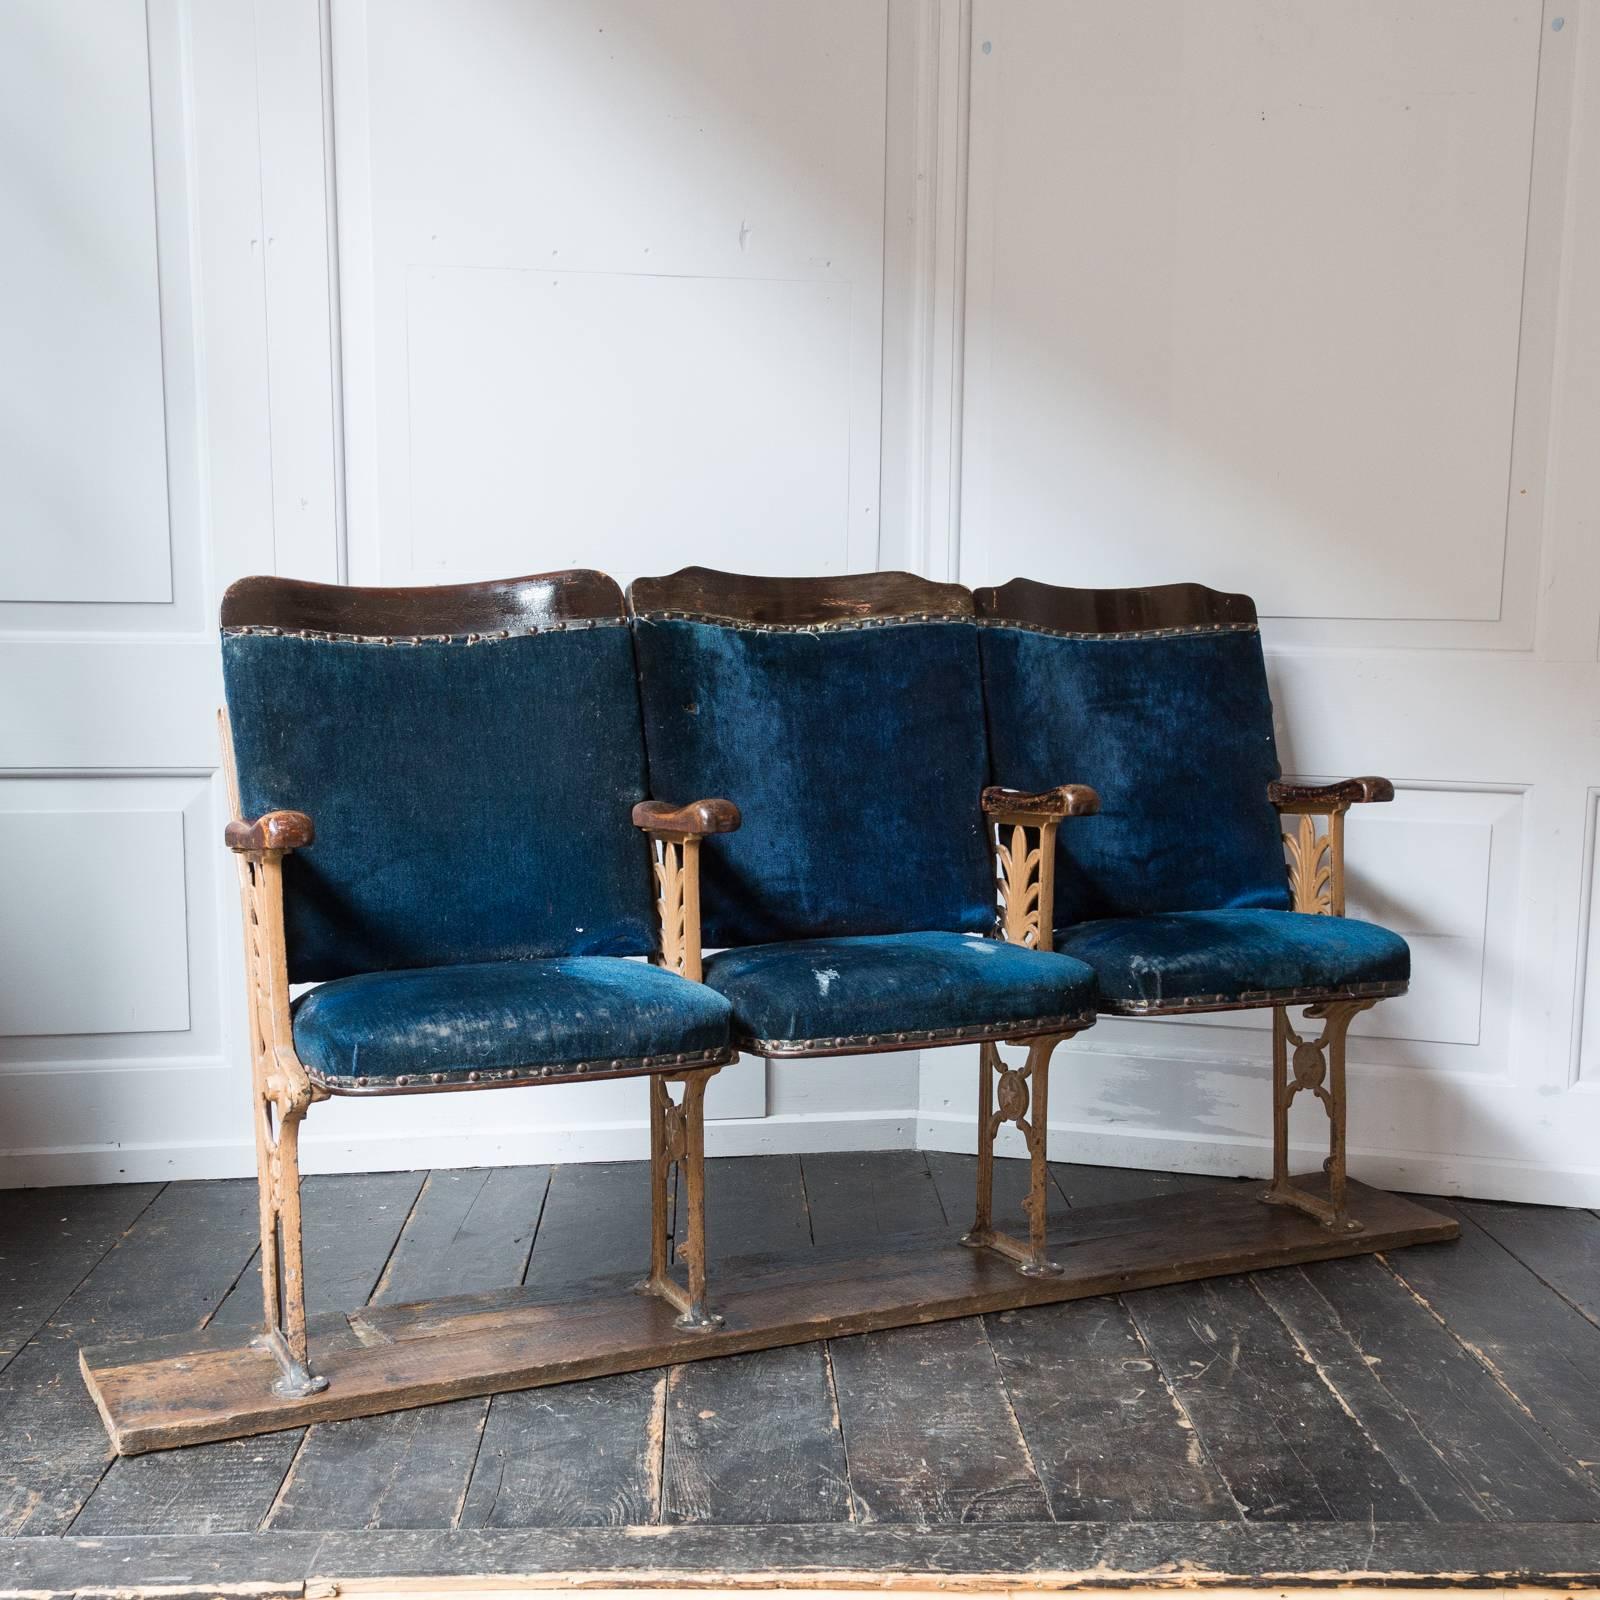 Ex Curtain Road, Shoreditch, London. A triplet of distressed Victorian velvet cinema seats with highly ornate cast iron supports and later dark stained pine base.